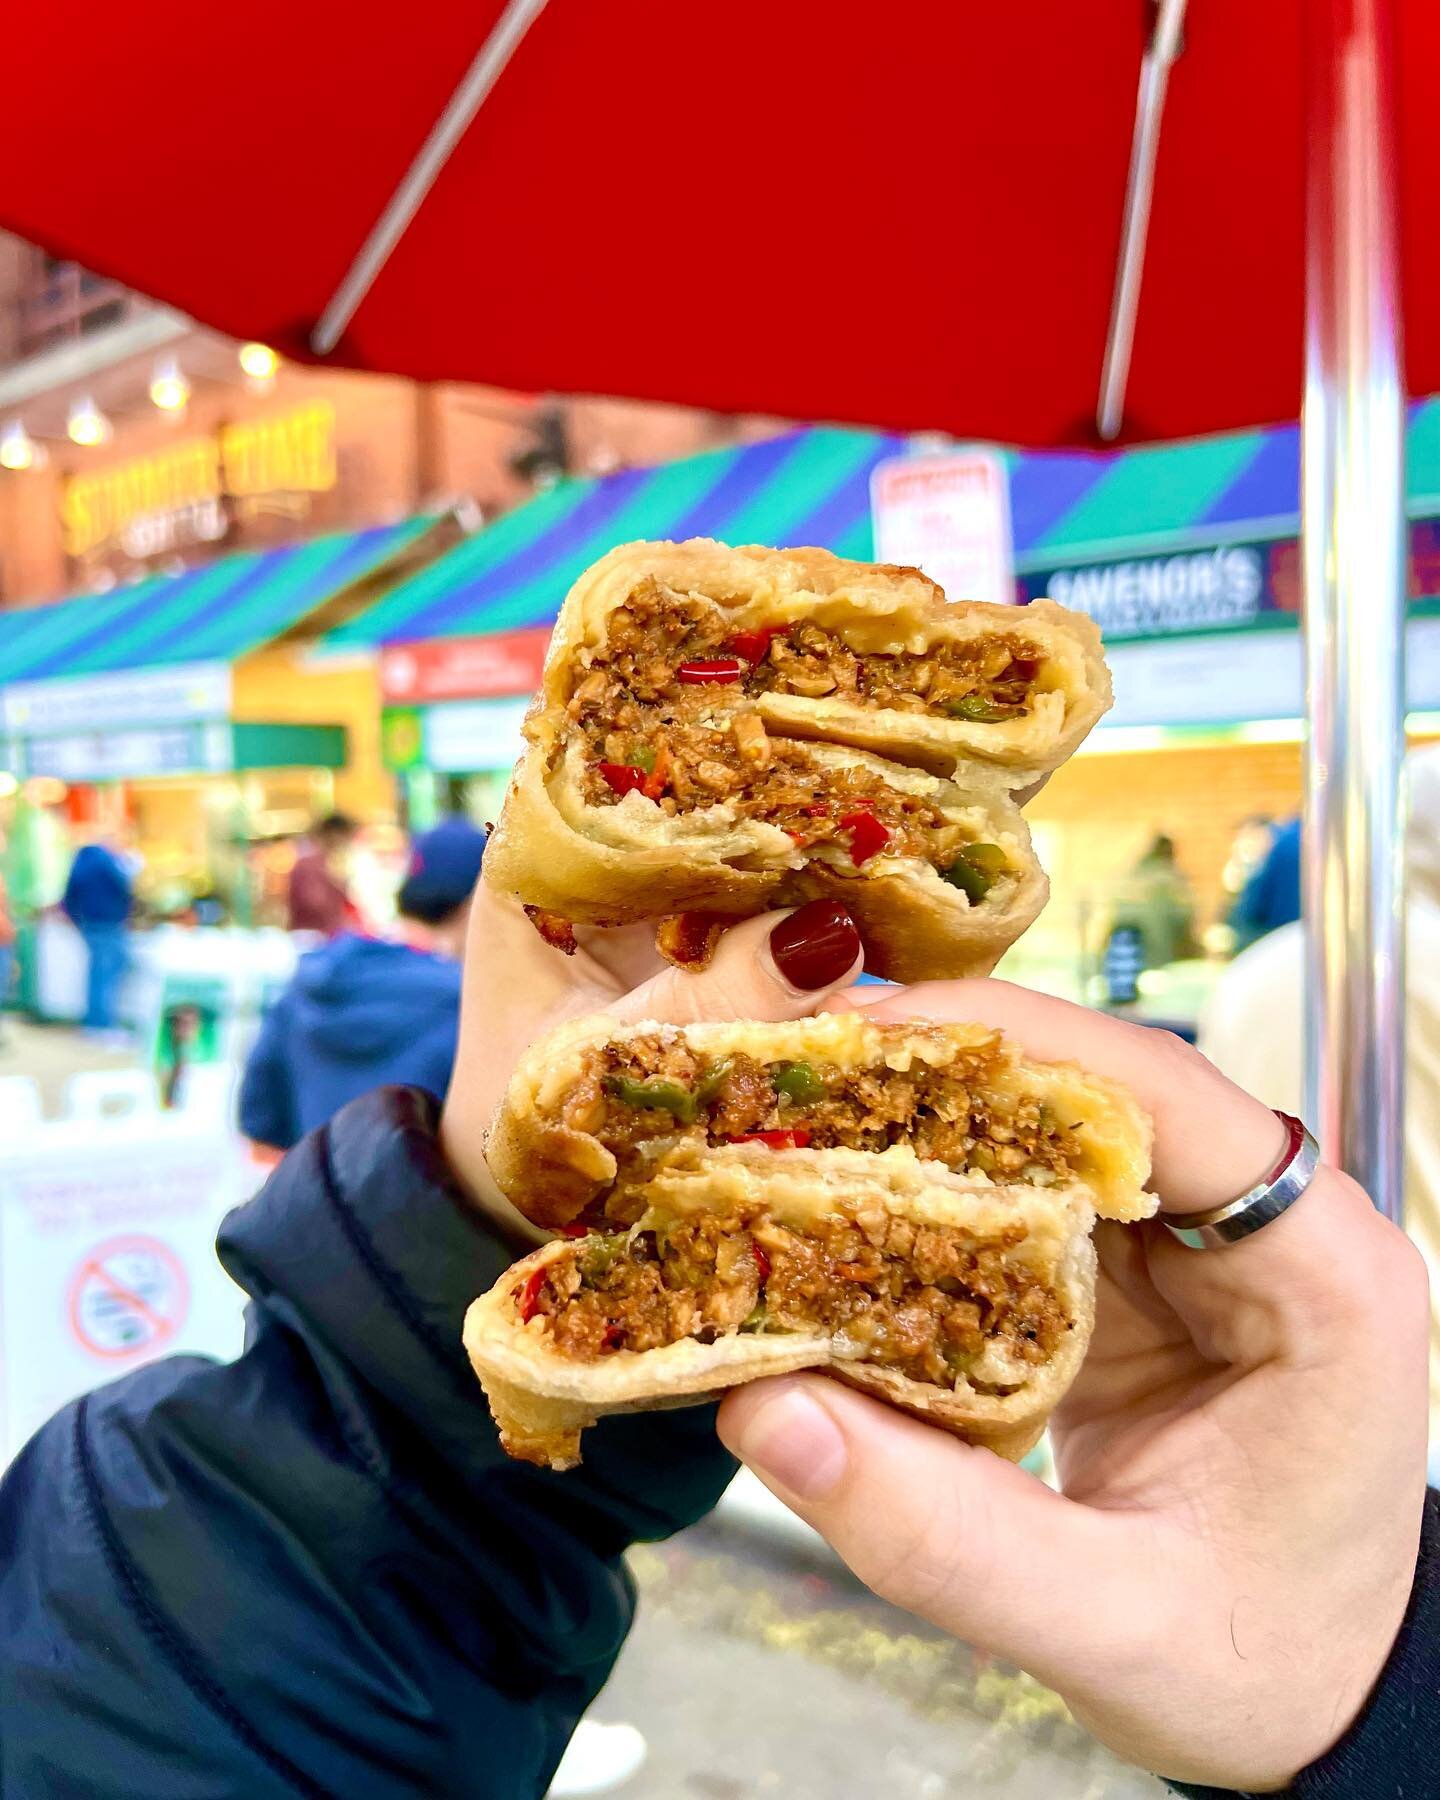 Fenway nights + @mingsbings &gt;&gt;&gt;&gt; 

If you have been following for a while, you know we are OBSESSED with @mingtsai crunchy plant-based and gluten-free wraps

✨ Cheeseburger and Sausage &amp; Peppers are our favorites to order at Jersey St